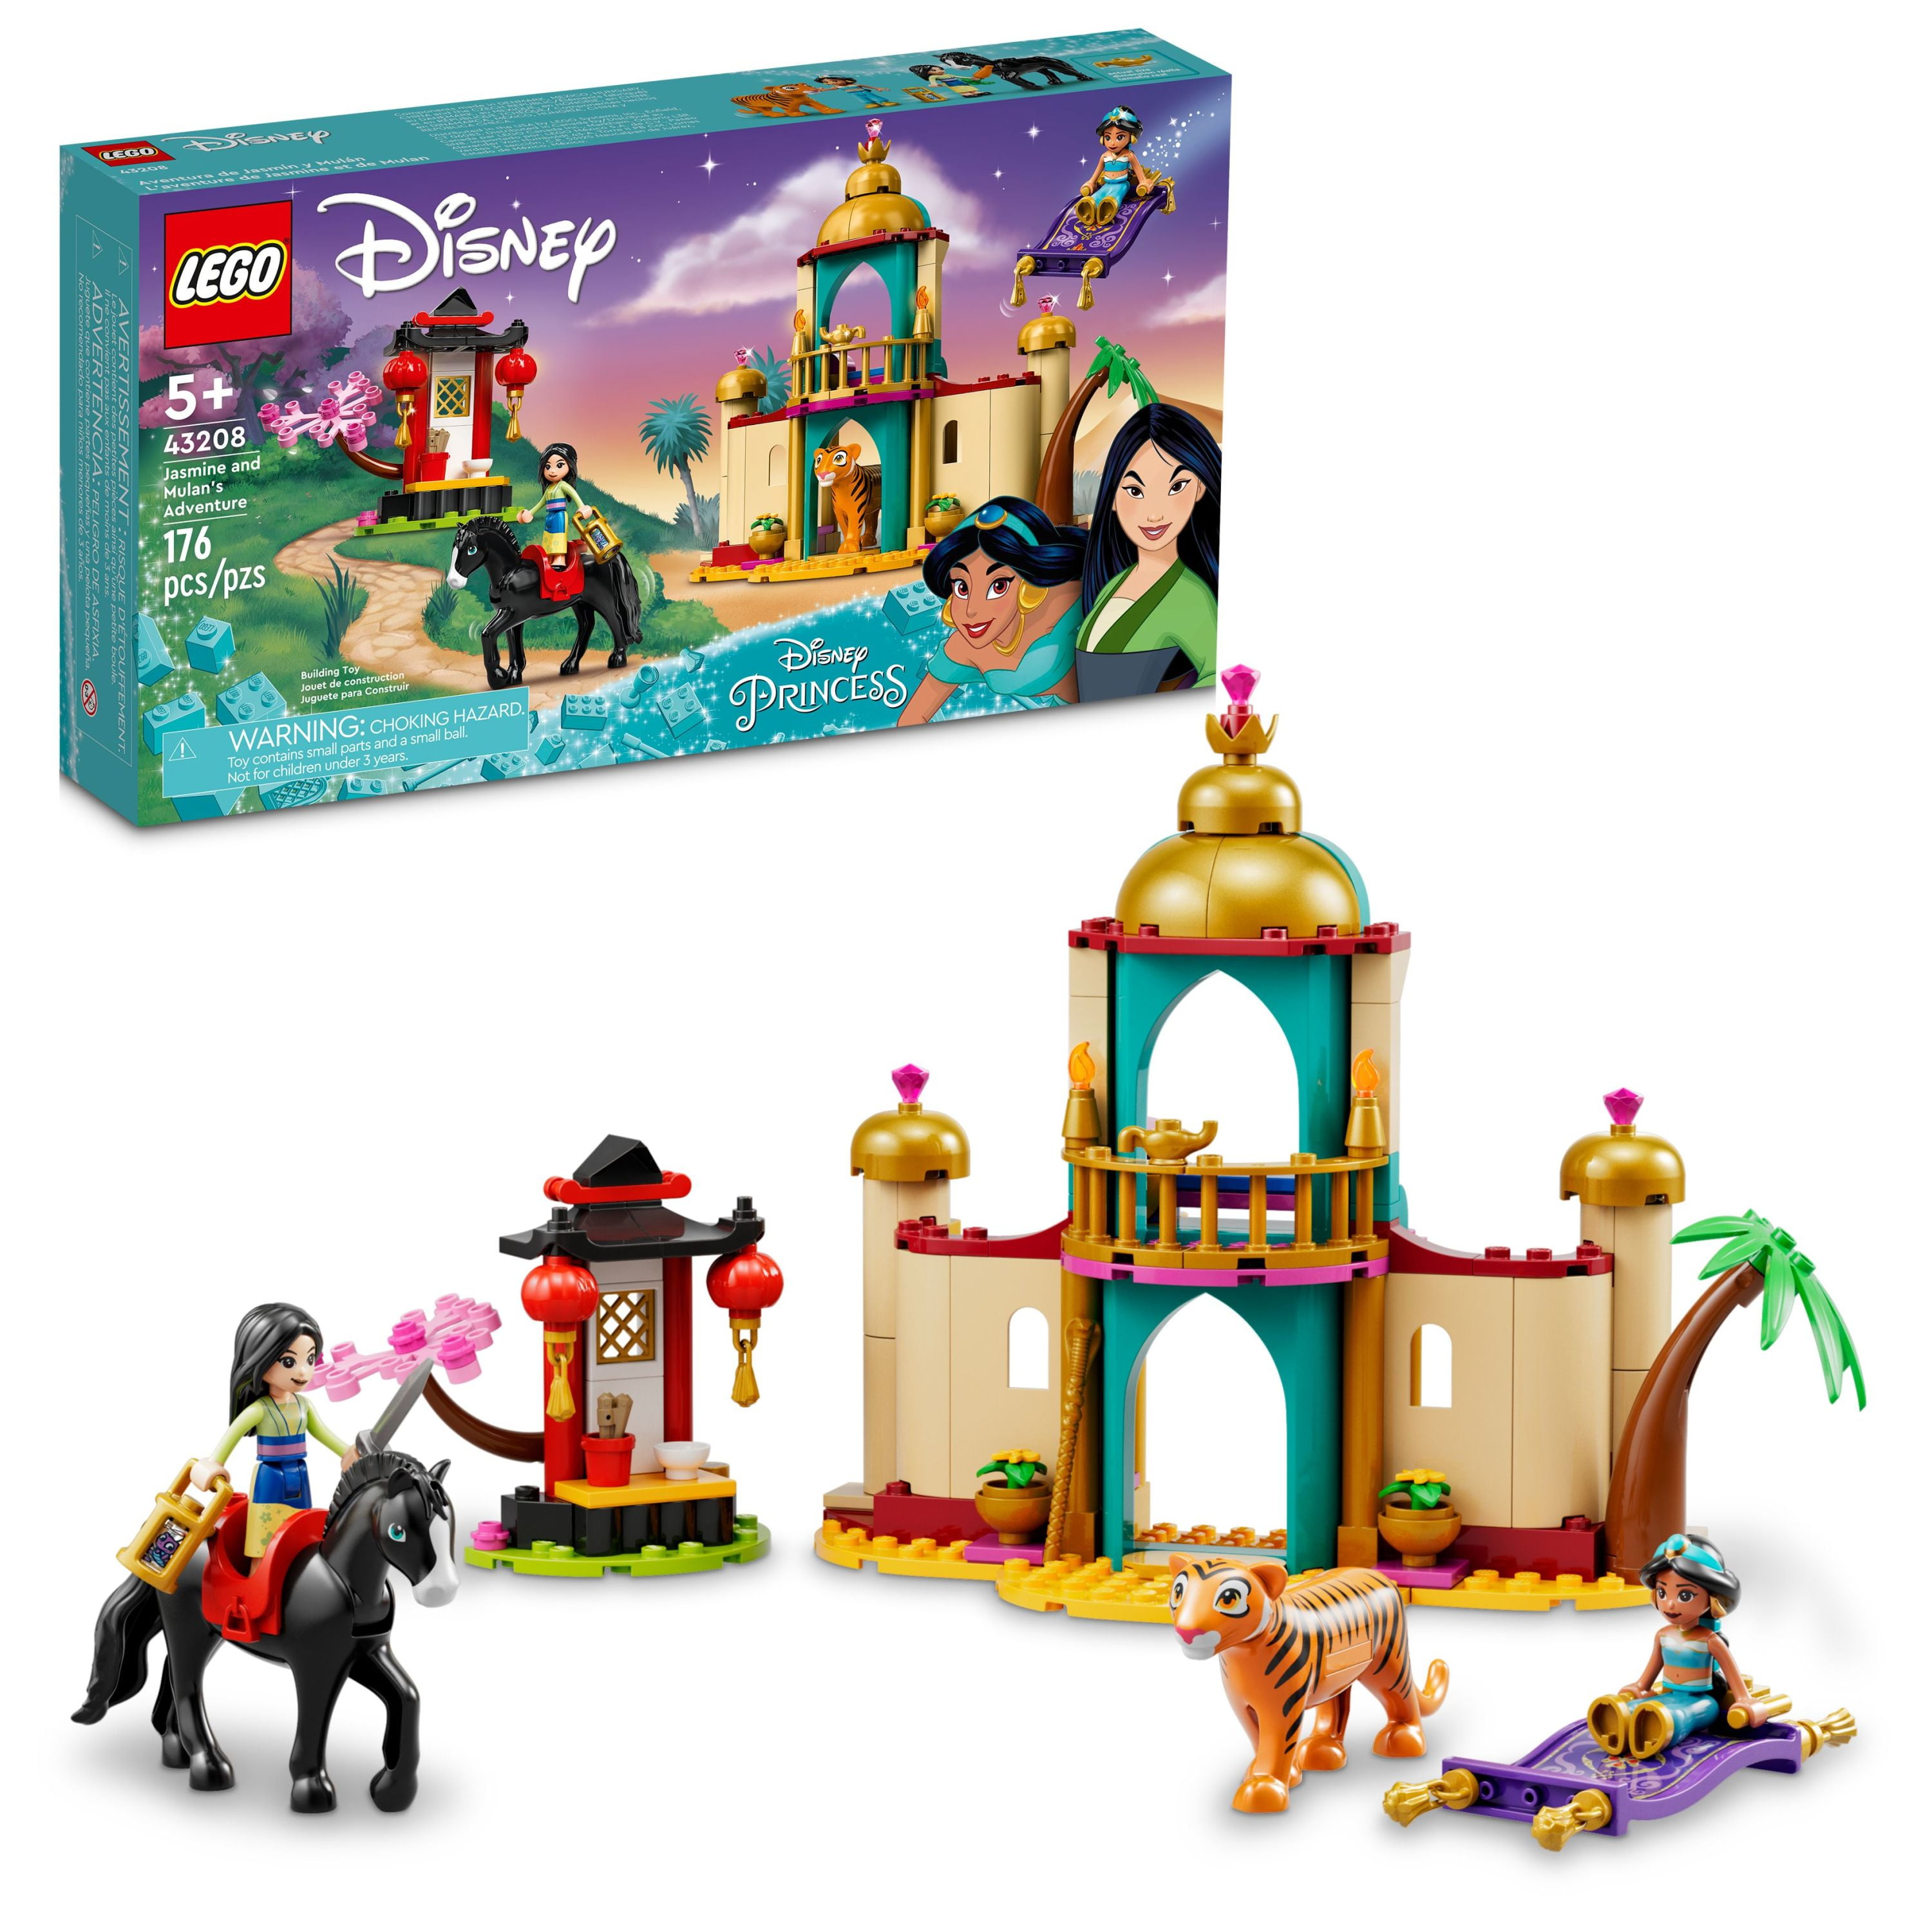 LEGO Disney Jasmine and Mulan's Adventure 43208 Palace Set, Aladdin & Mulan Buildable Toy with Horse and Tiger Figures, Gifts for Kids, Girls & Boys - Walmart.com